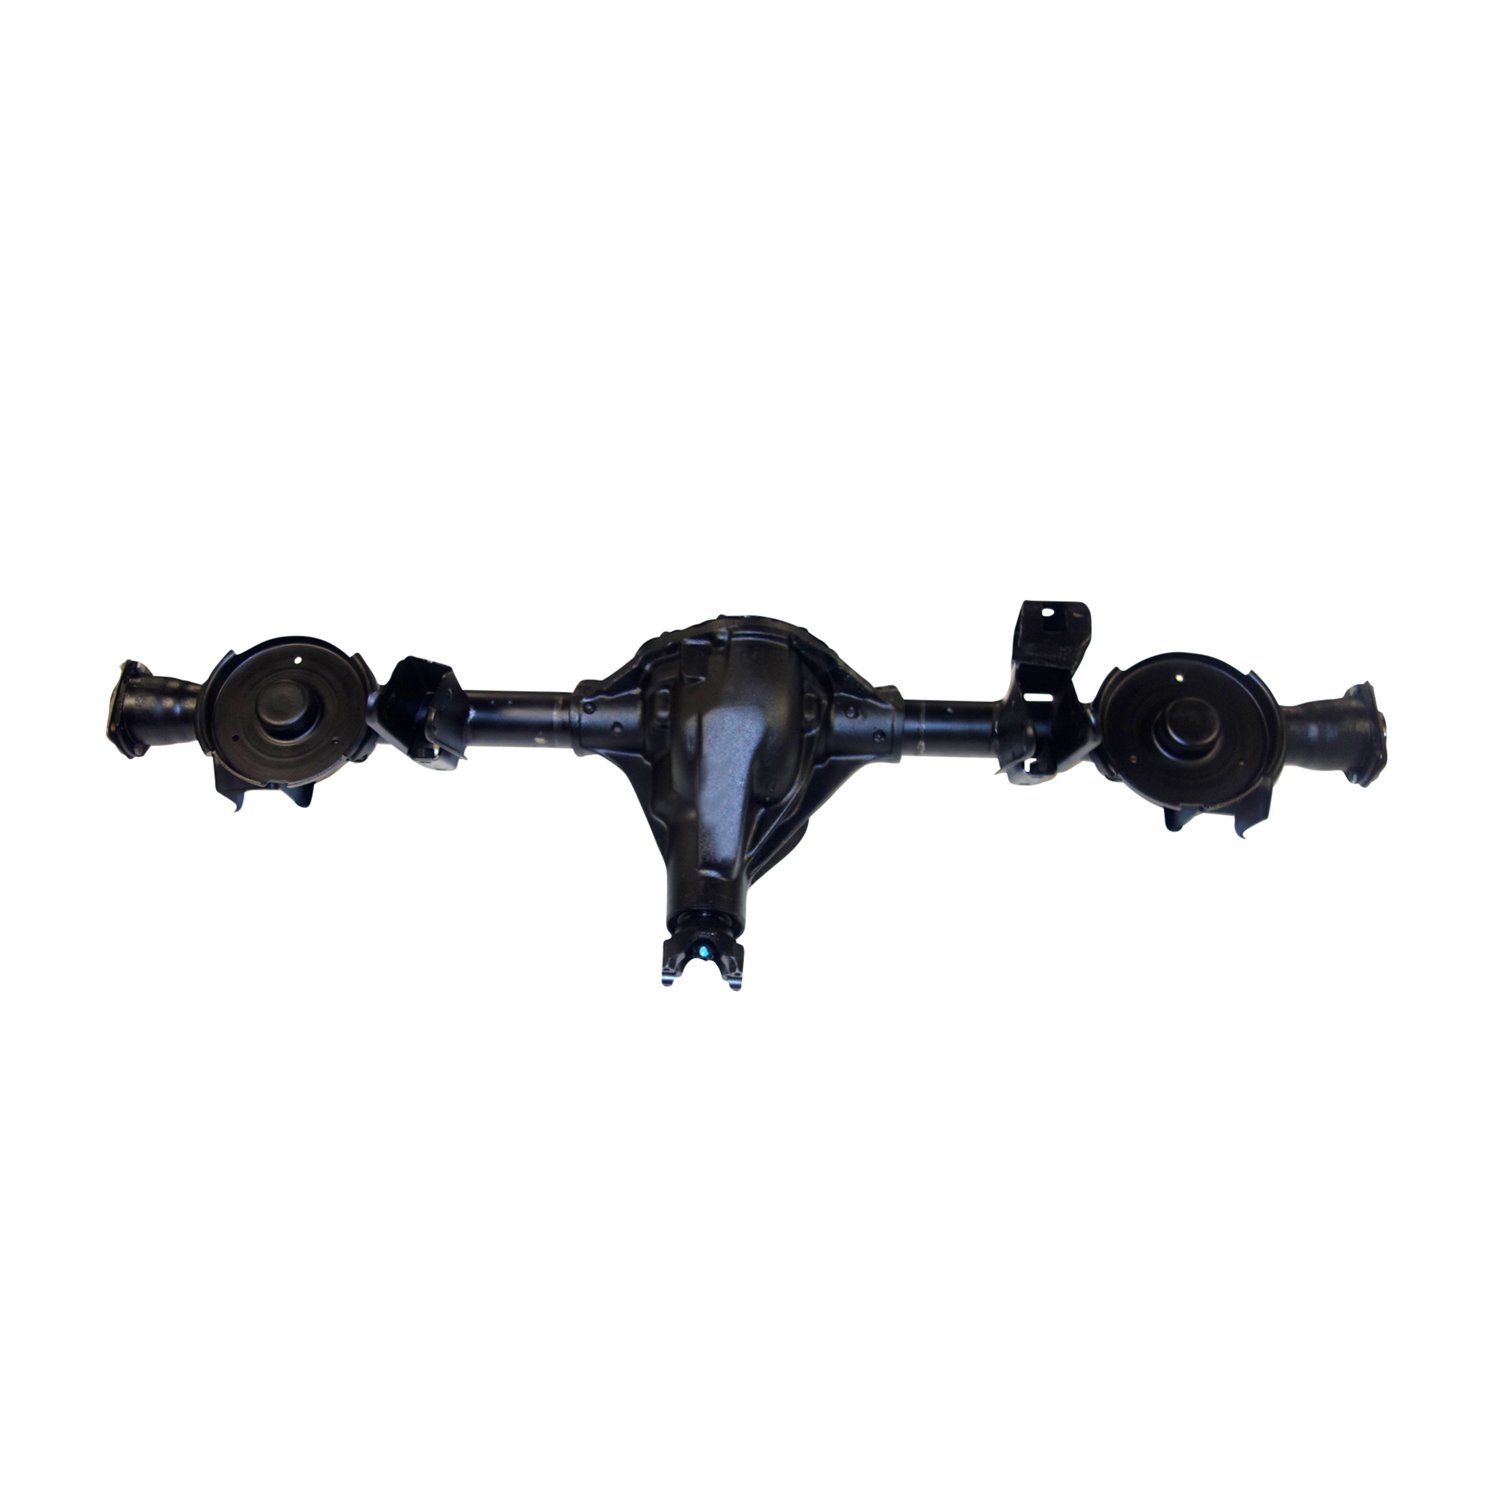 Remanufactured Complete Axle Assembly for Dana 44 07 Jeep Wrangler 4.11 Ratio, Posi LSD